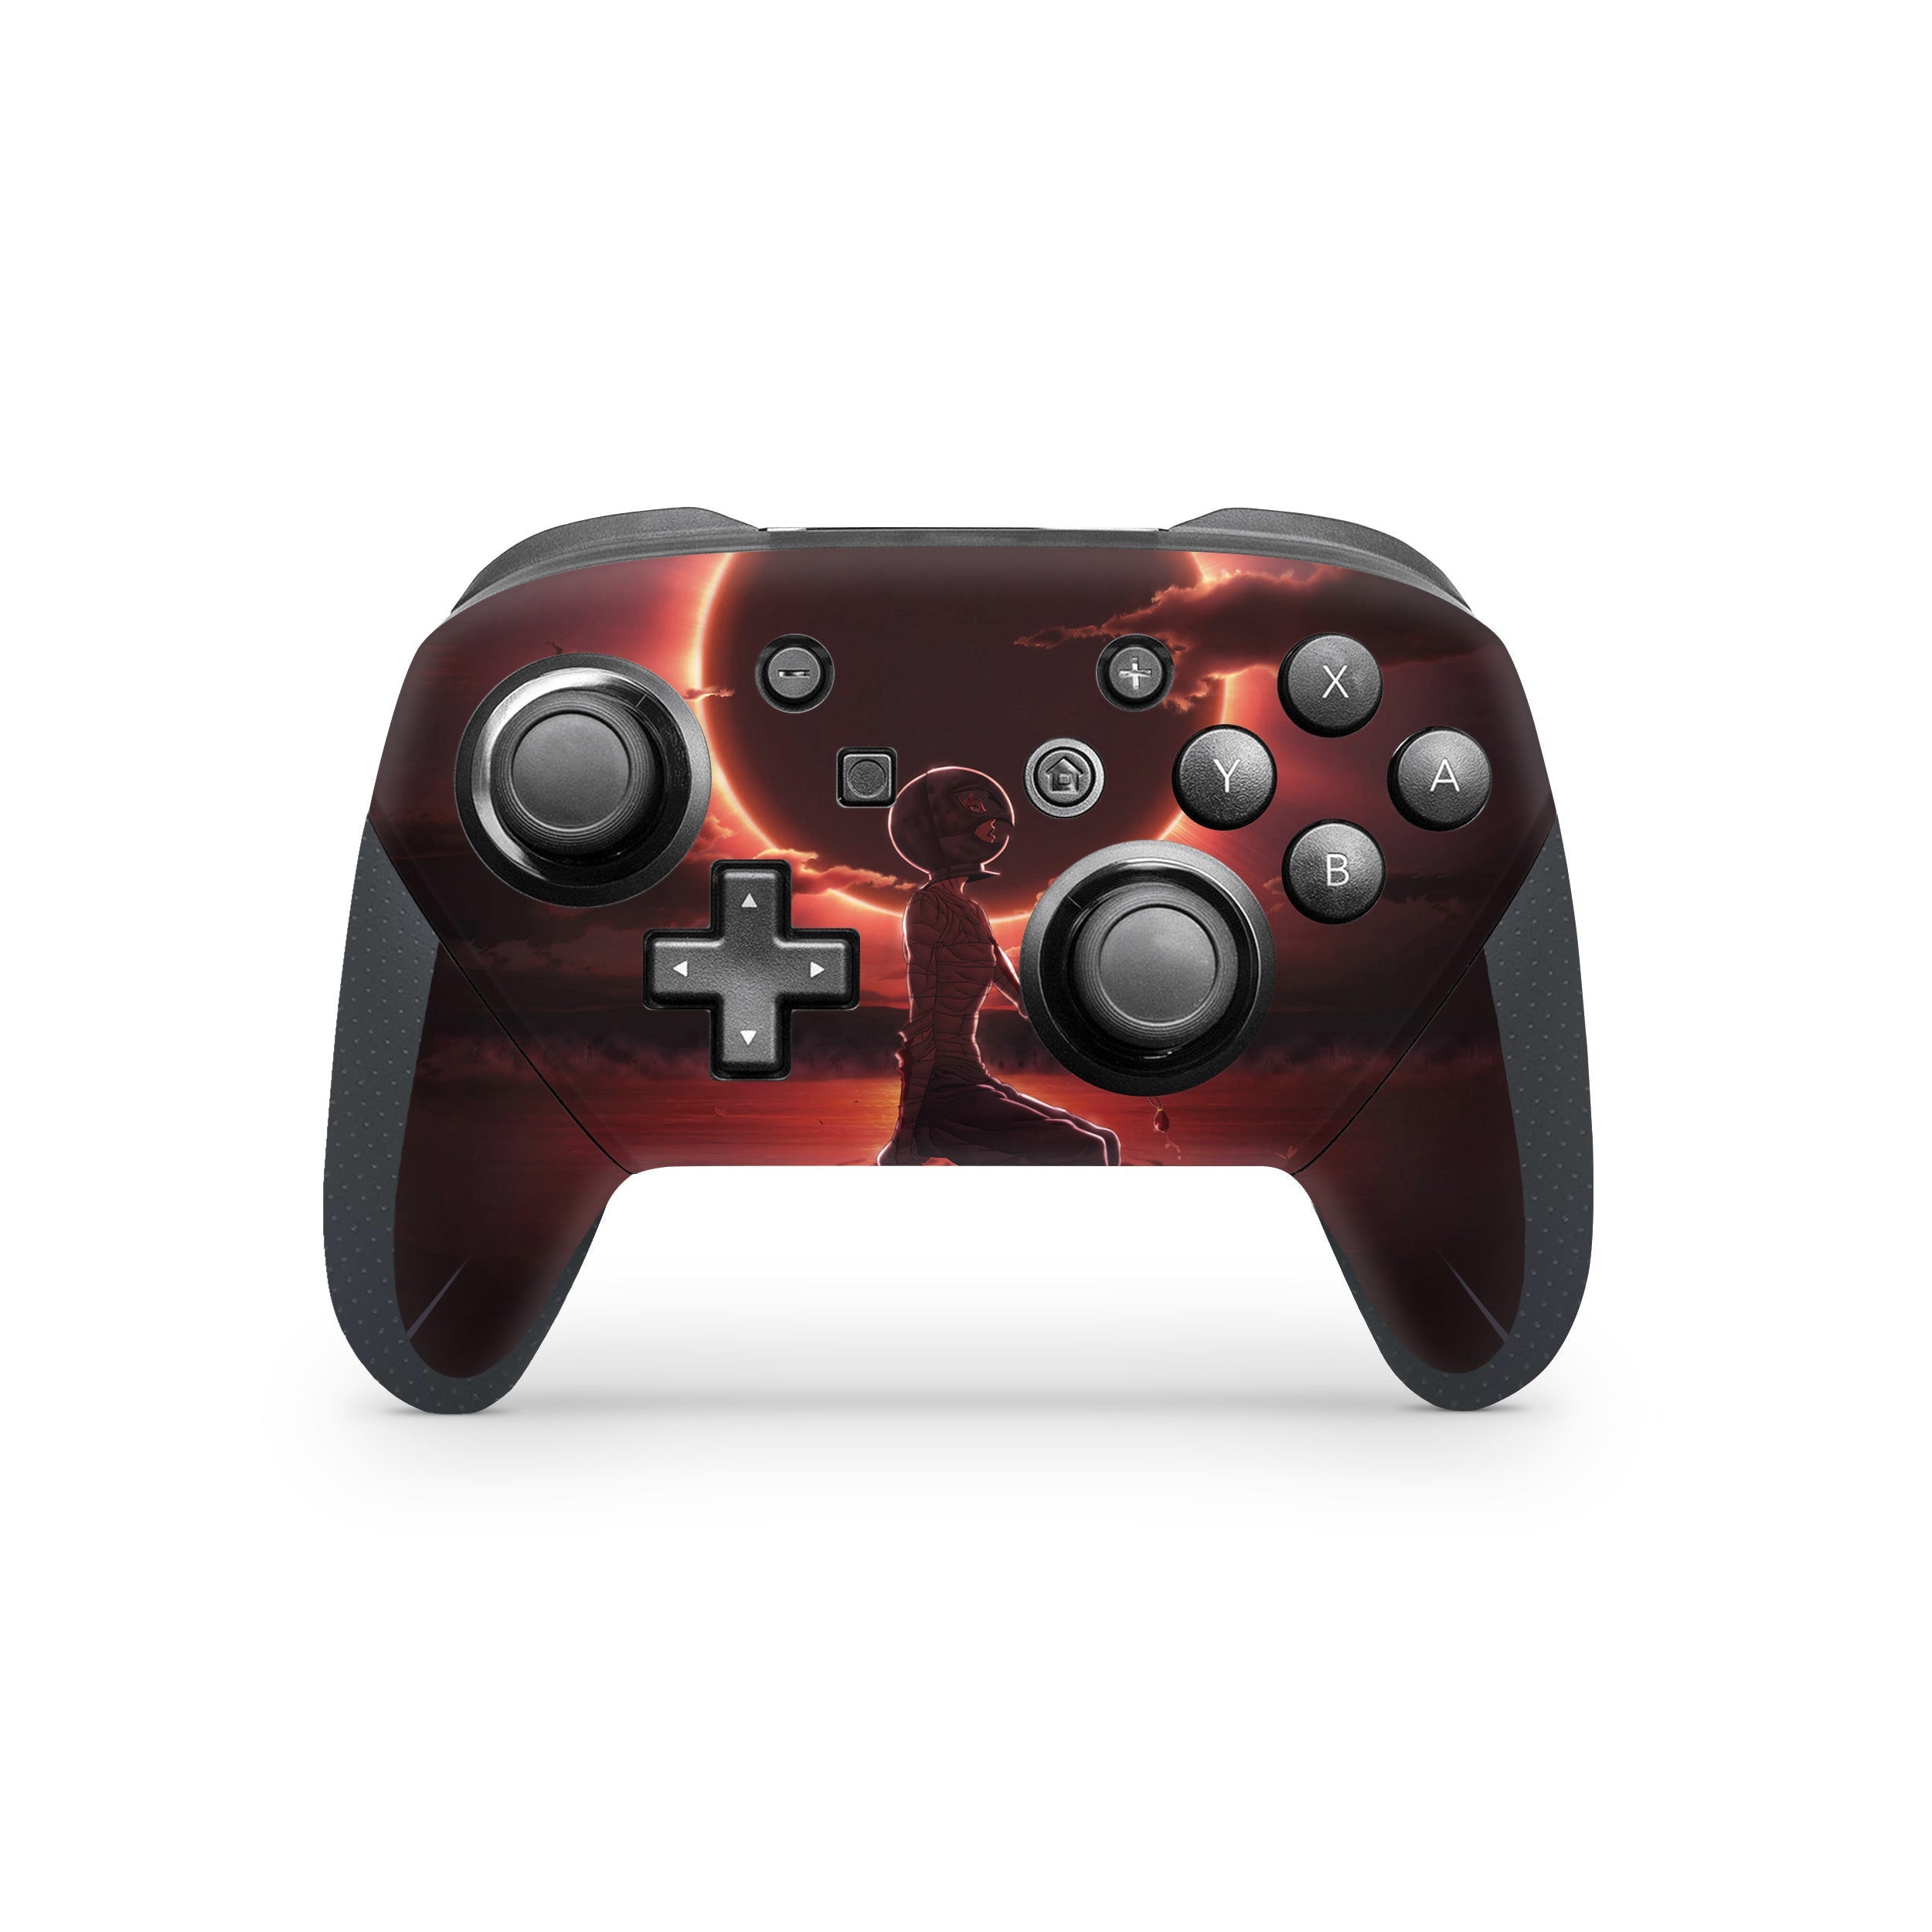 A video game skin featuring a Berserk Griffith design for the Switch Pro Controller.